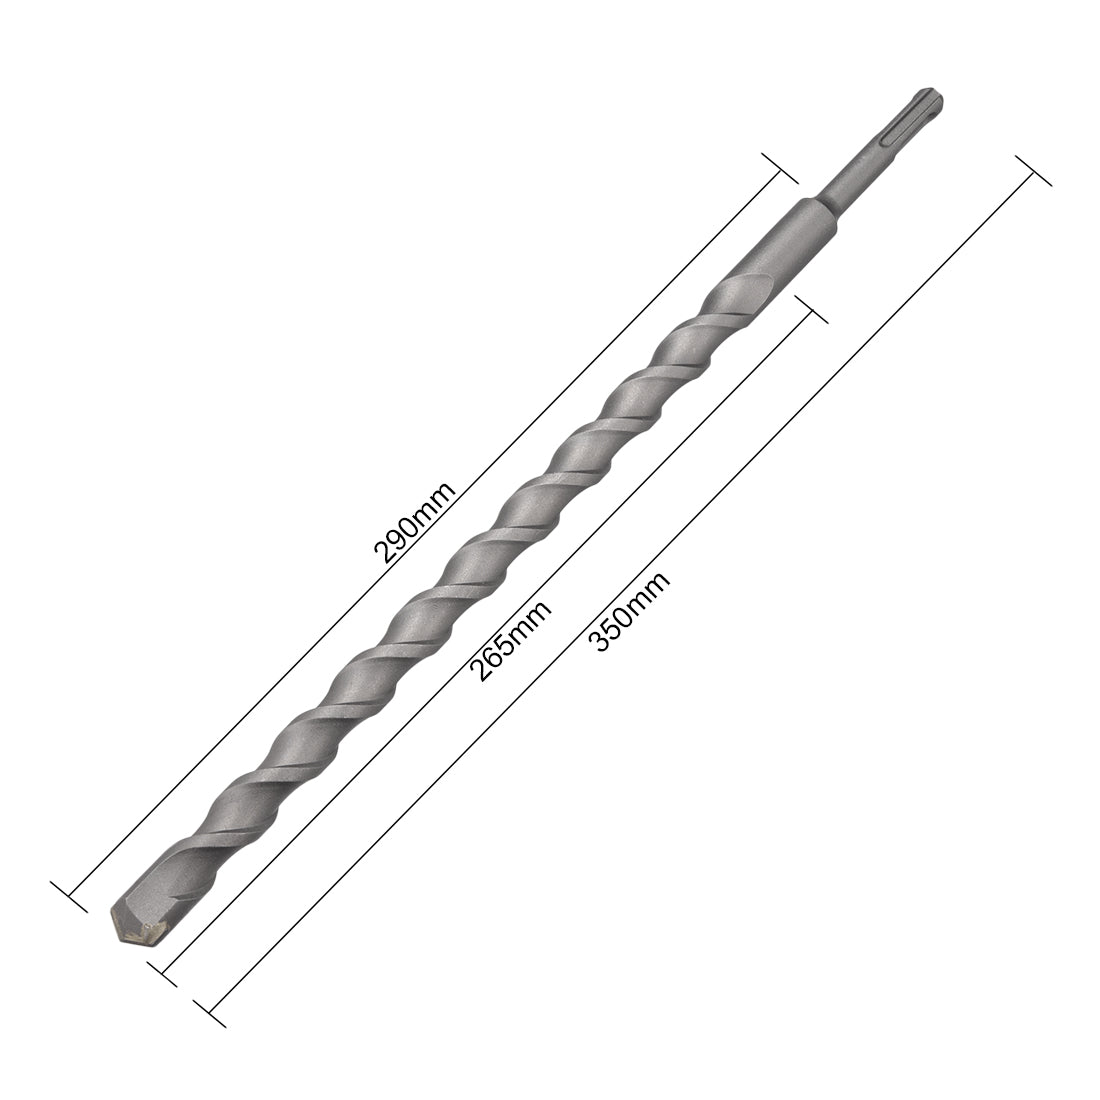 uxcell Uxcell Masonry Drill Bit 18mmx350mm Round Shank 265mm Drilling for Impact Drill